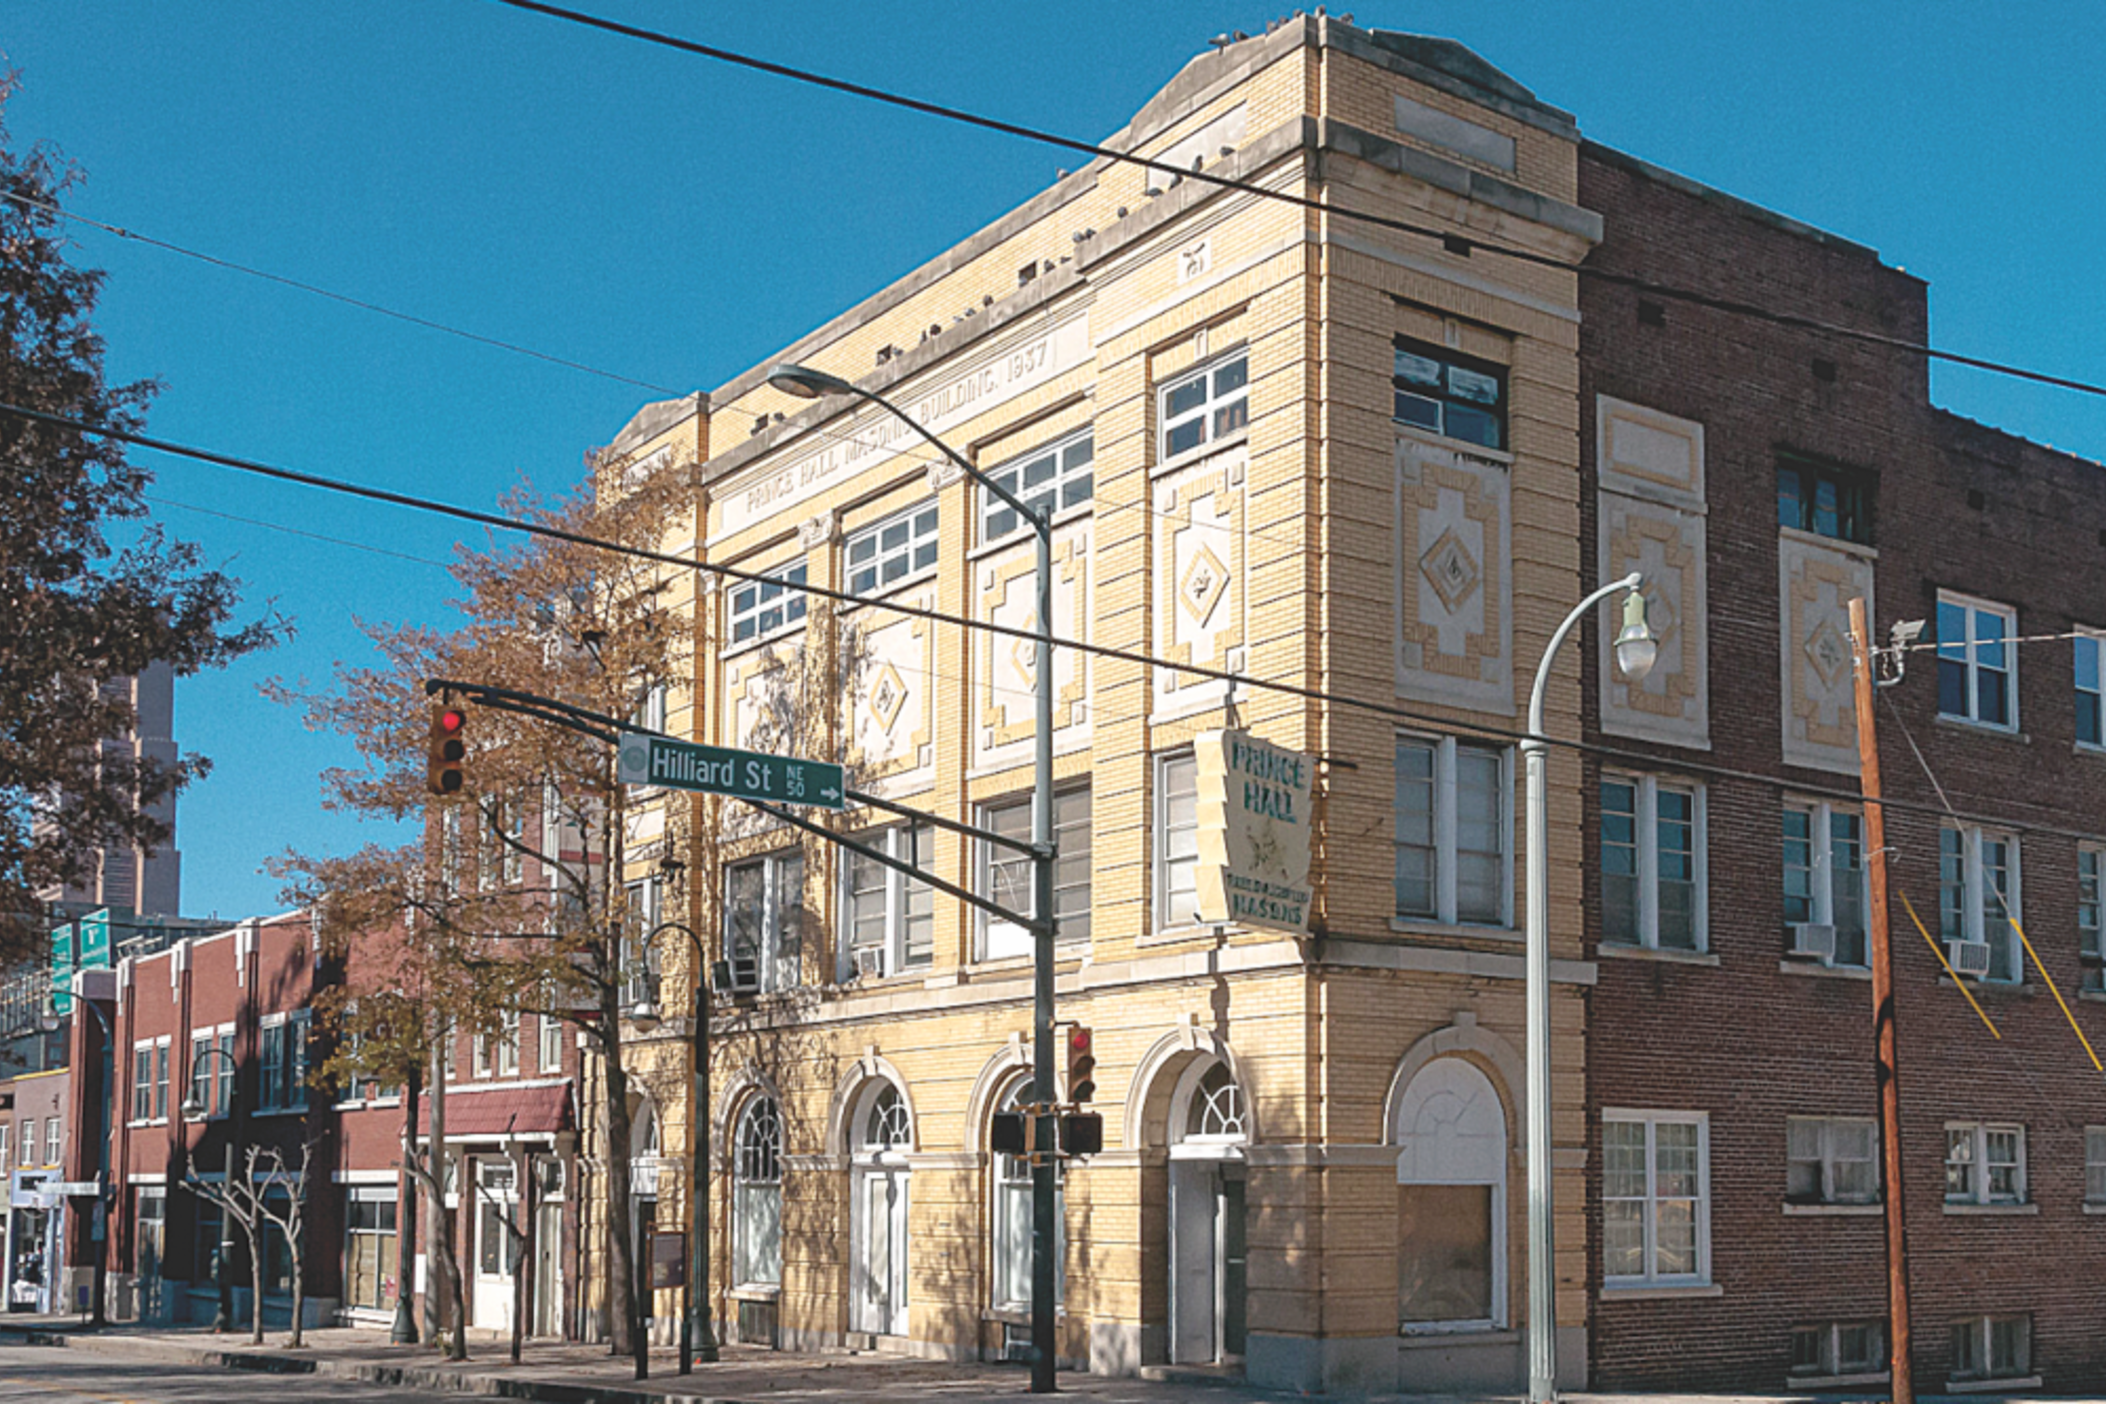 The Prince Hall Masonic Lodge in Atlanta's Sweet Auburn neighborhood was built in 1937 and is being restored with funding from the Trust for Public Land. and other sources